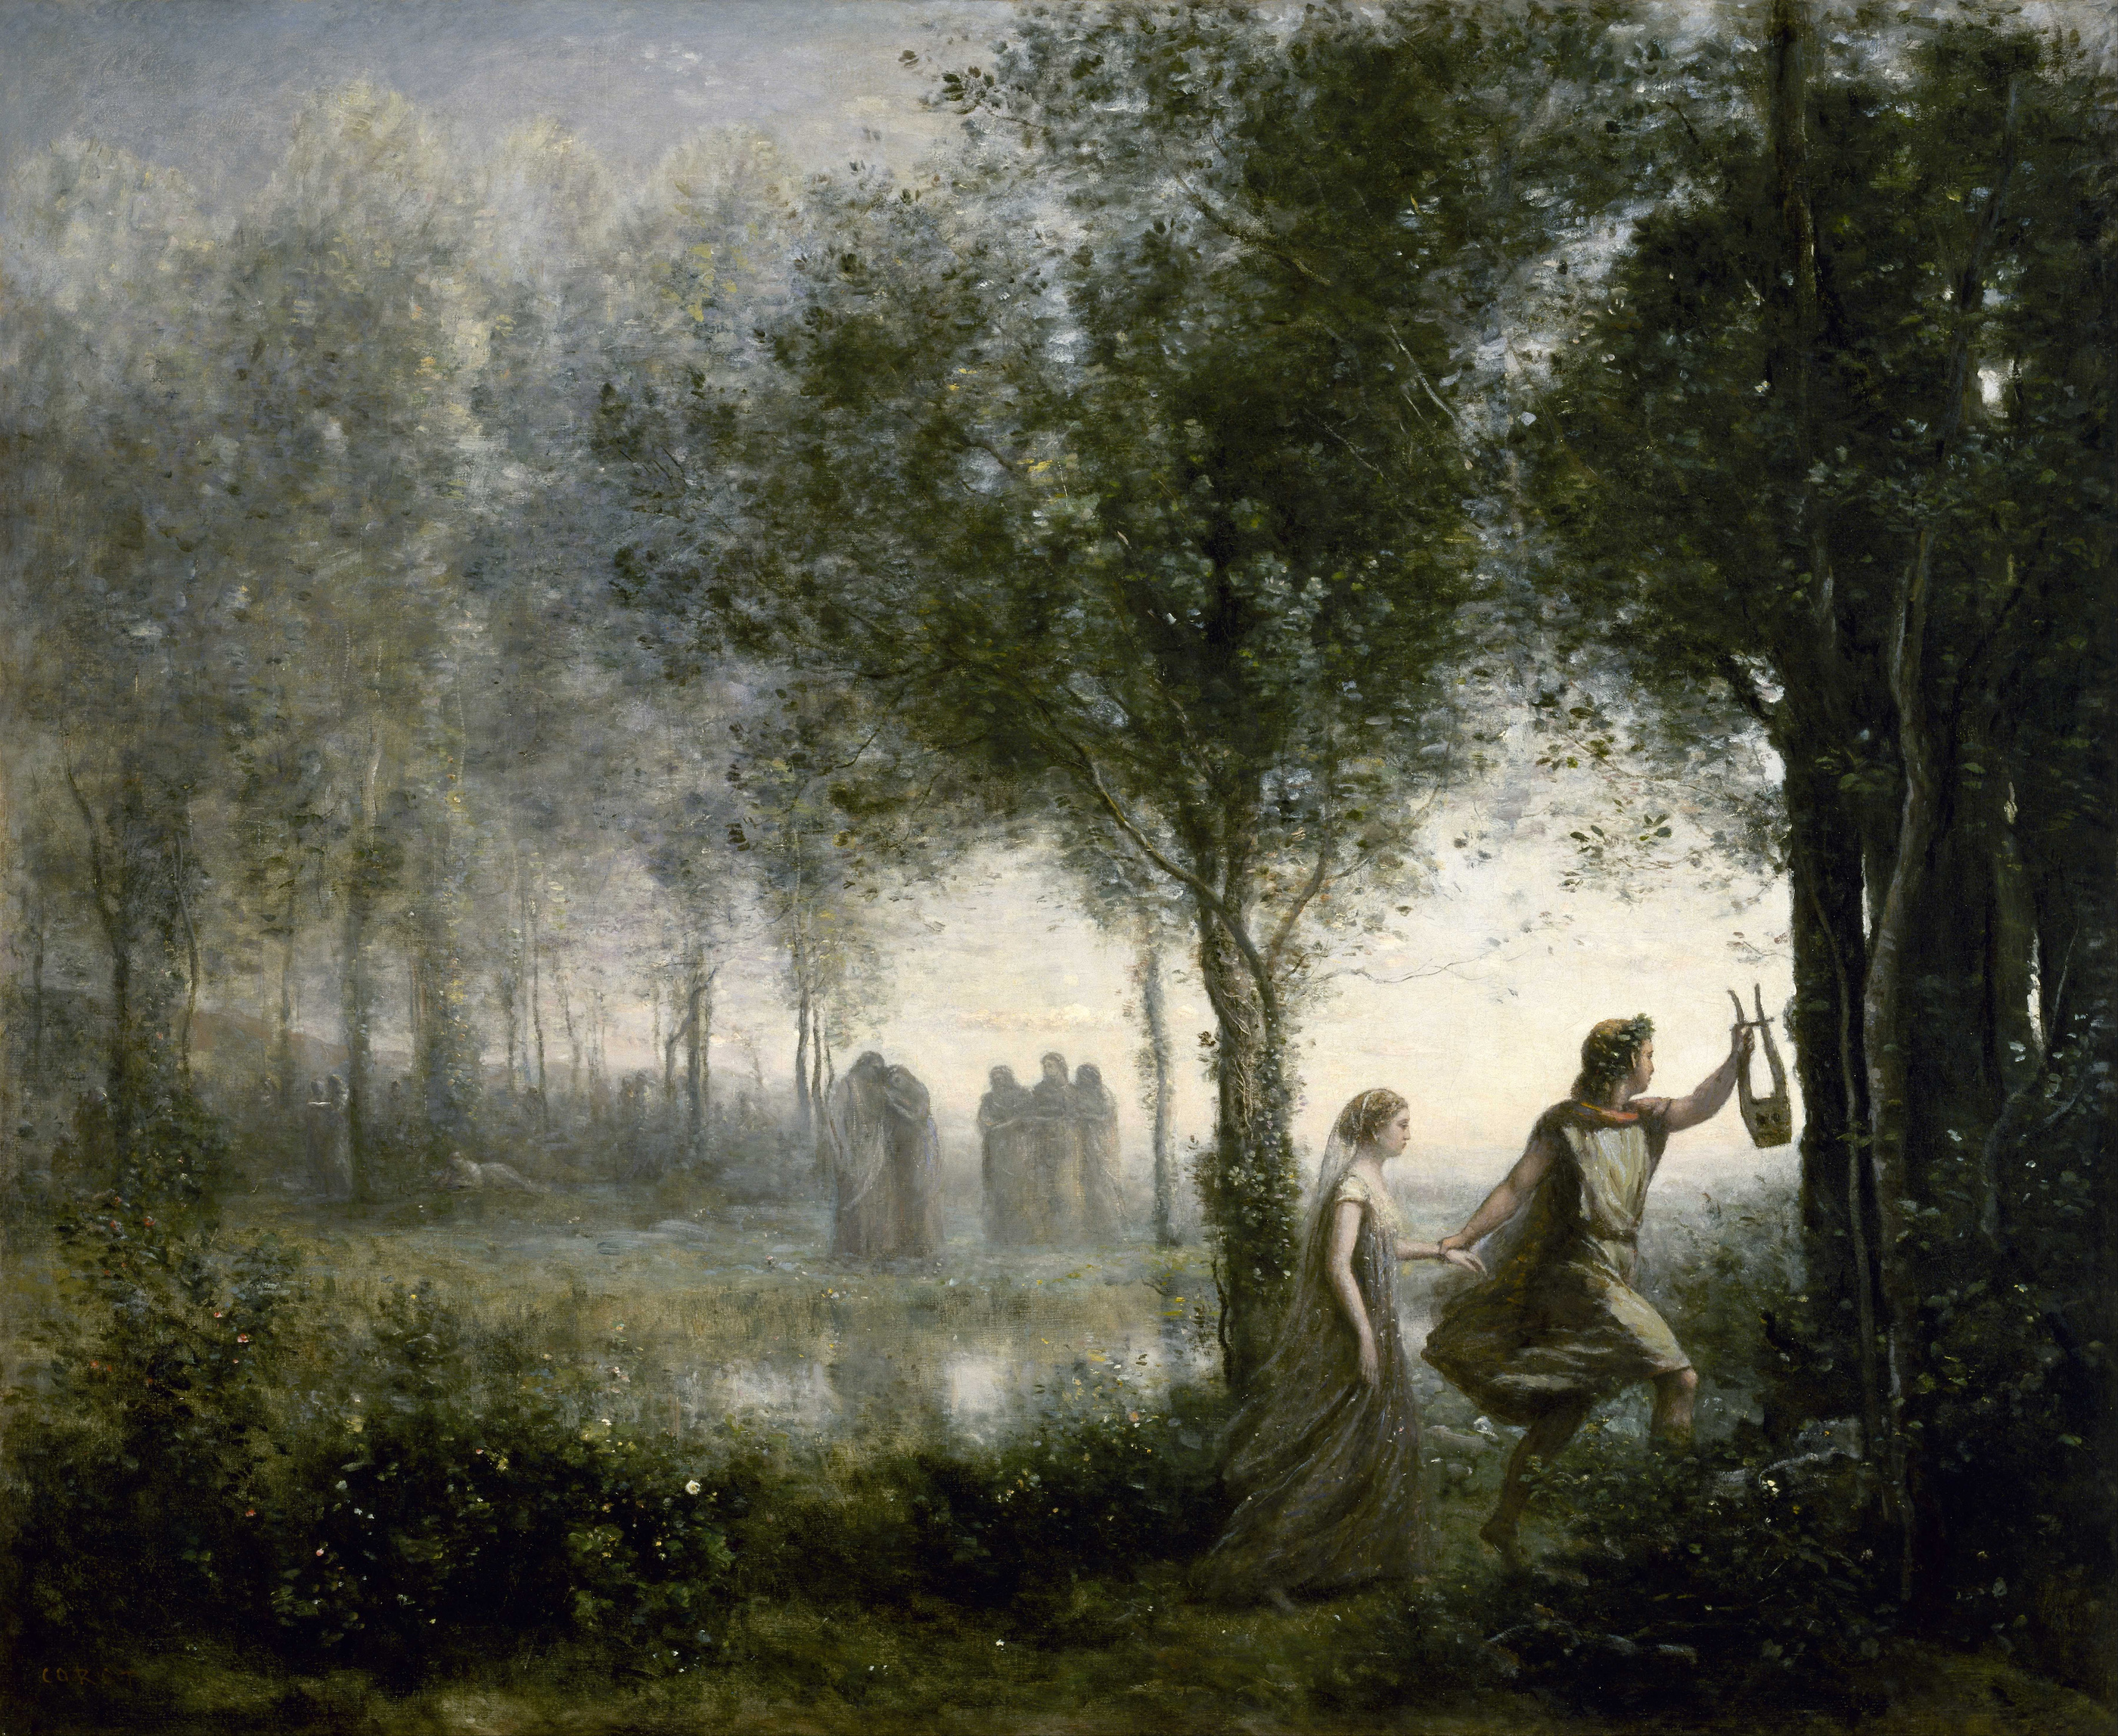 Orpheus Leading Eurydice from the Underworld by Jean-Baptiste-Camille Corot - 1861 - 137.2 x 112.7 cm Museum of Fine Arts